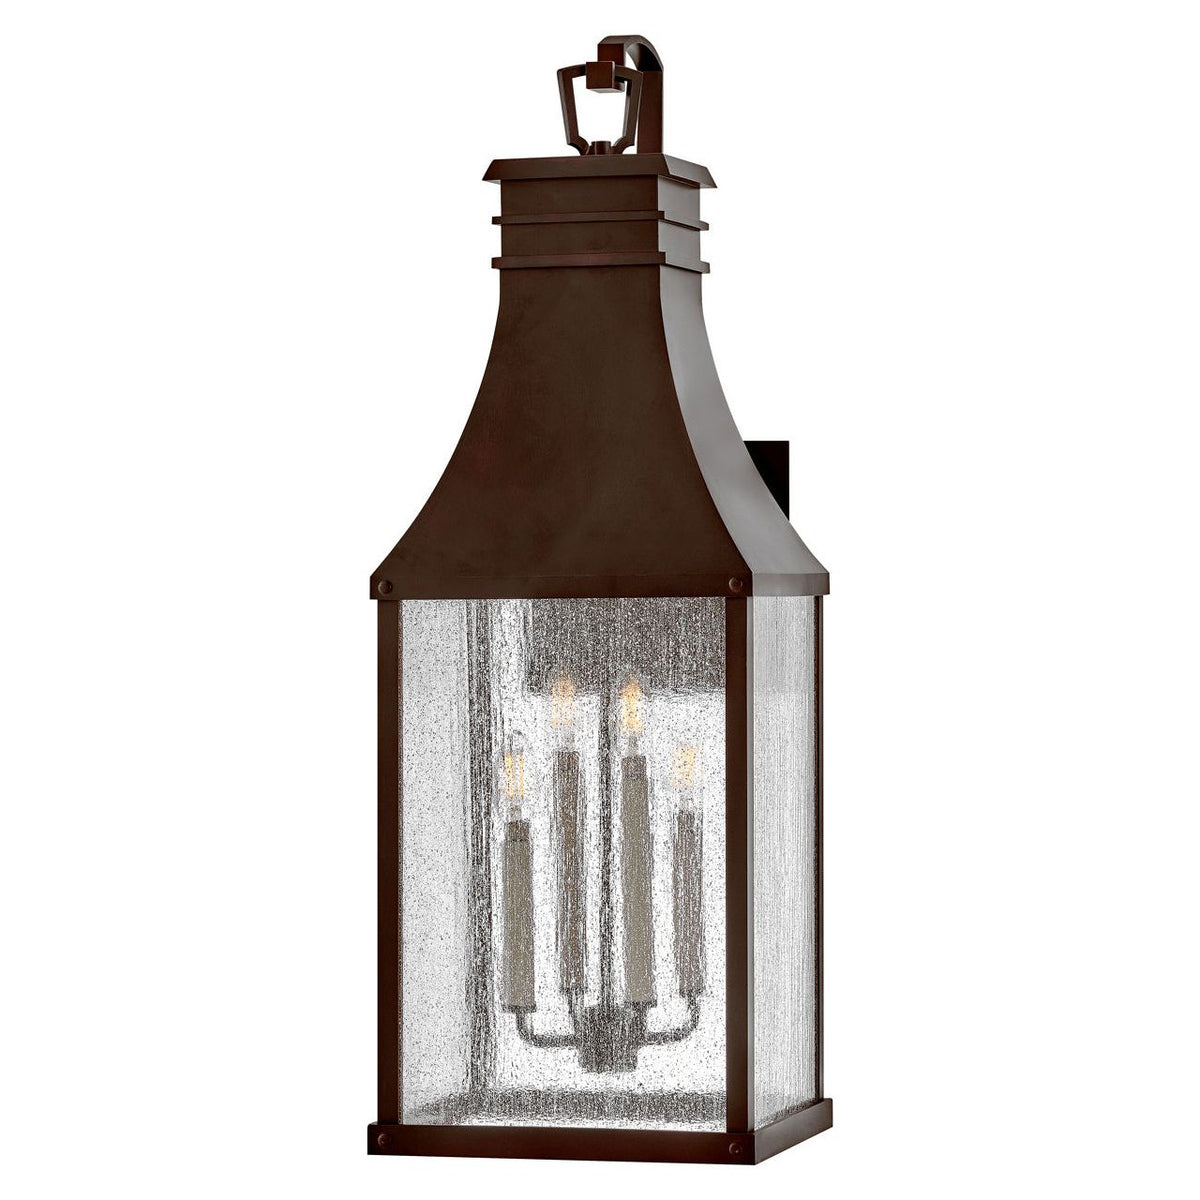 Hinkley Canada - 17468BLC - LED Wall Mount - Beacon Hill - Blackened Copper